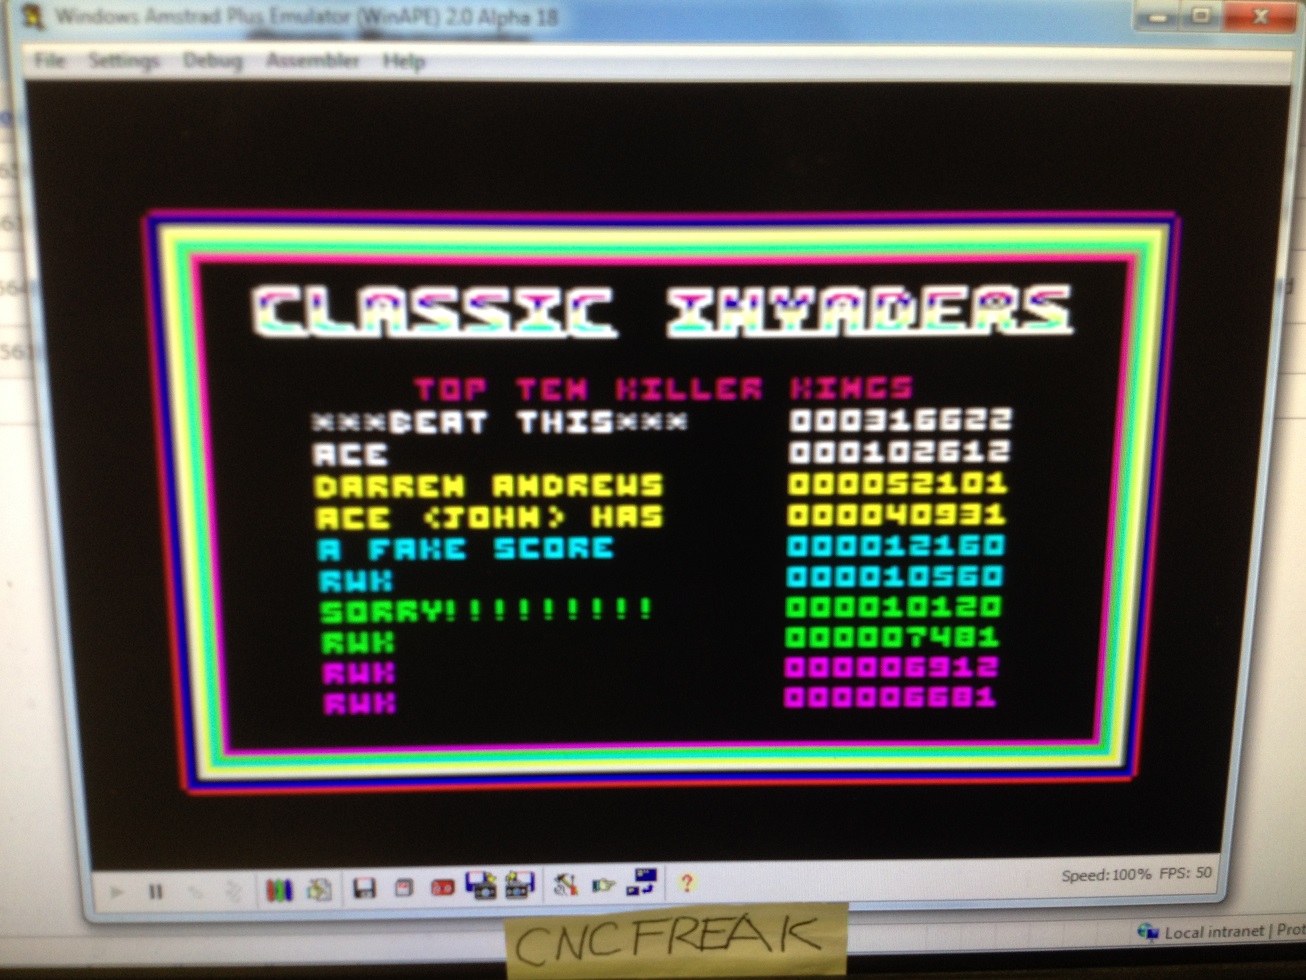 cncfreak: Classic Invaders (Amstrad CPC Emulated) 10,560 points on 2013-10-17 07:27:53